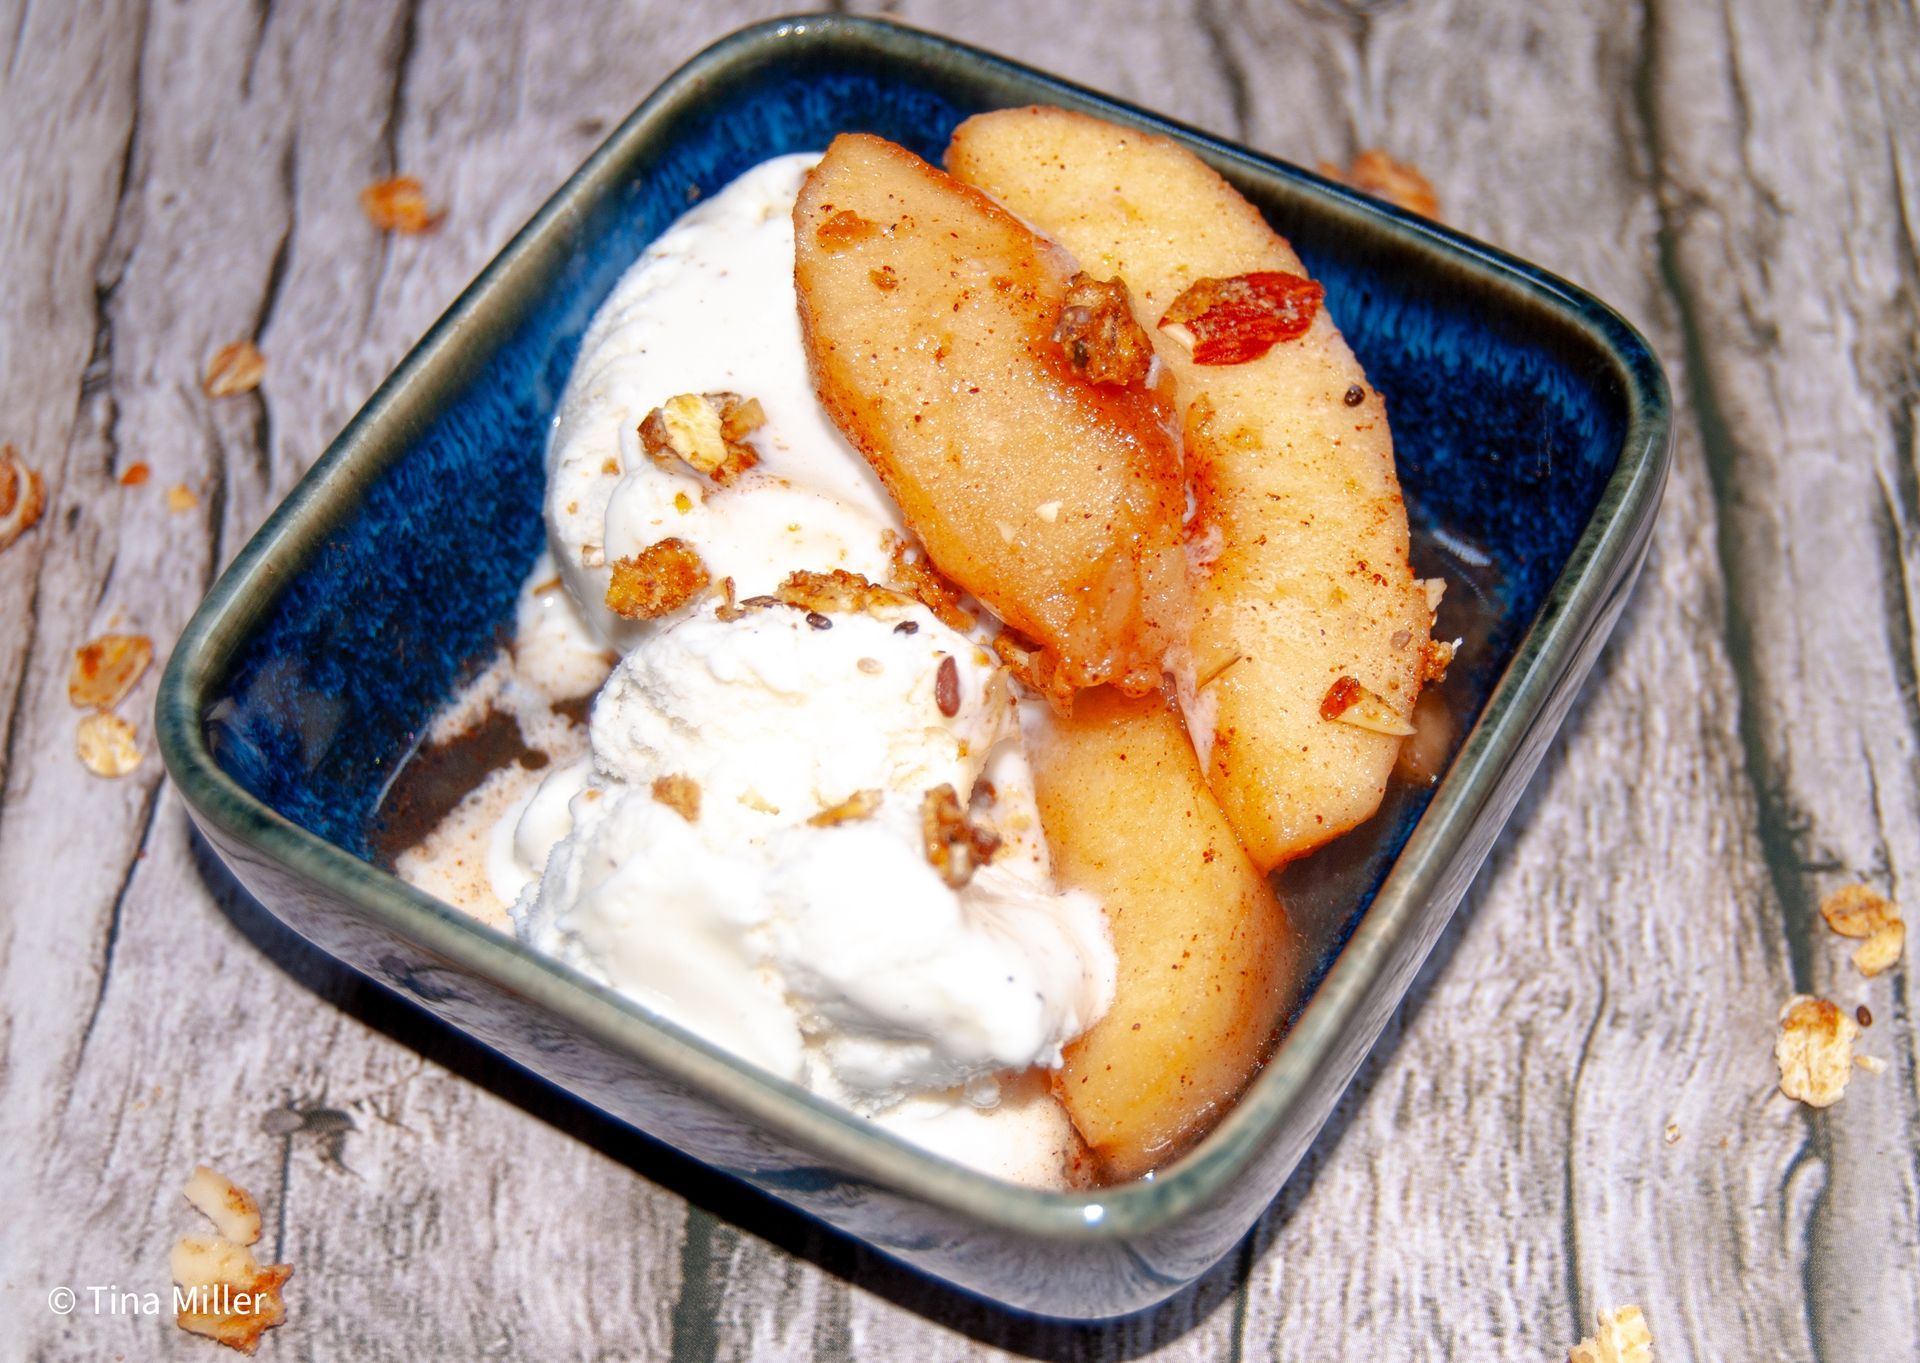 Cooked crockpot cinnamon apples in a small dessert dish with two scoops of vanilla ice cream, topped with granola.